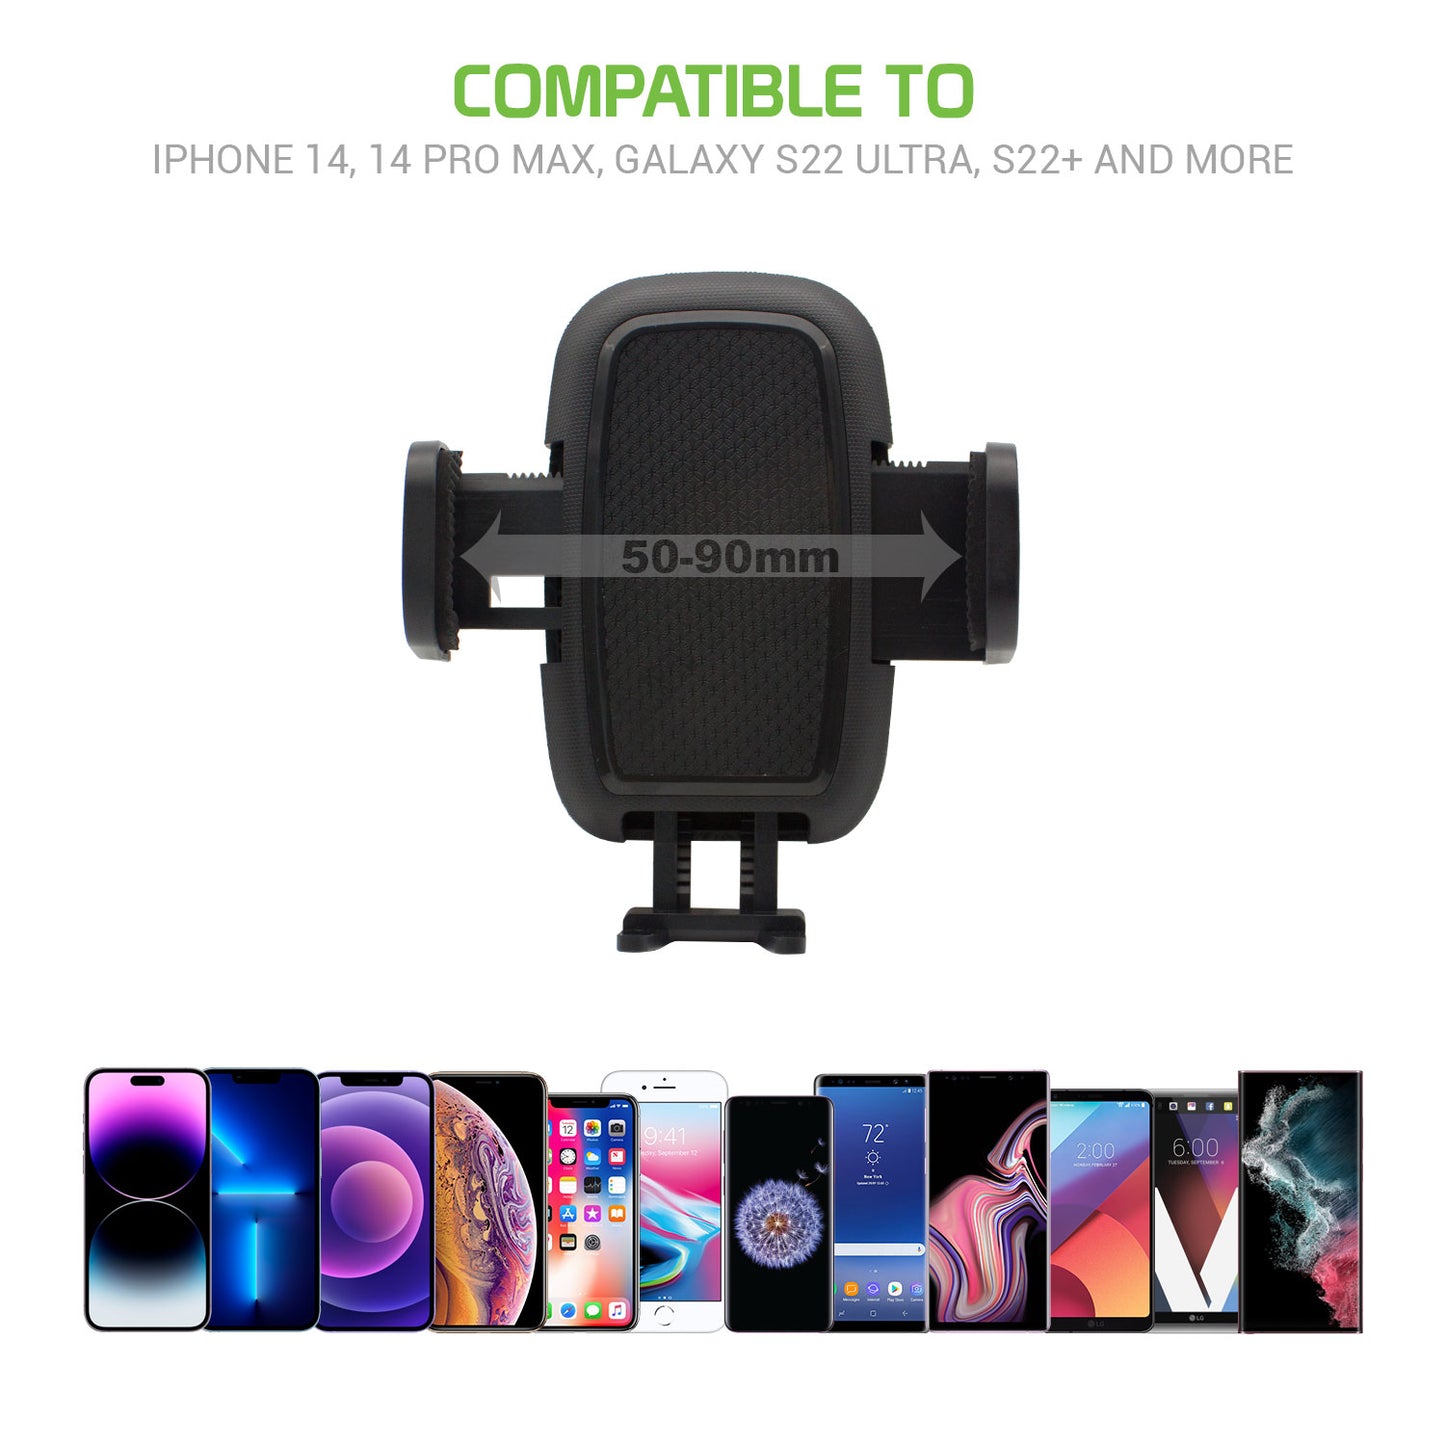 Air Vent Mount for Tesla Model 3 & Model Y Compatible to iPhone 14, 14 Pro Max, Galaxy S22 Ultra, S22+ and More